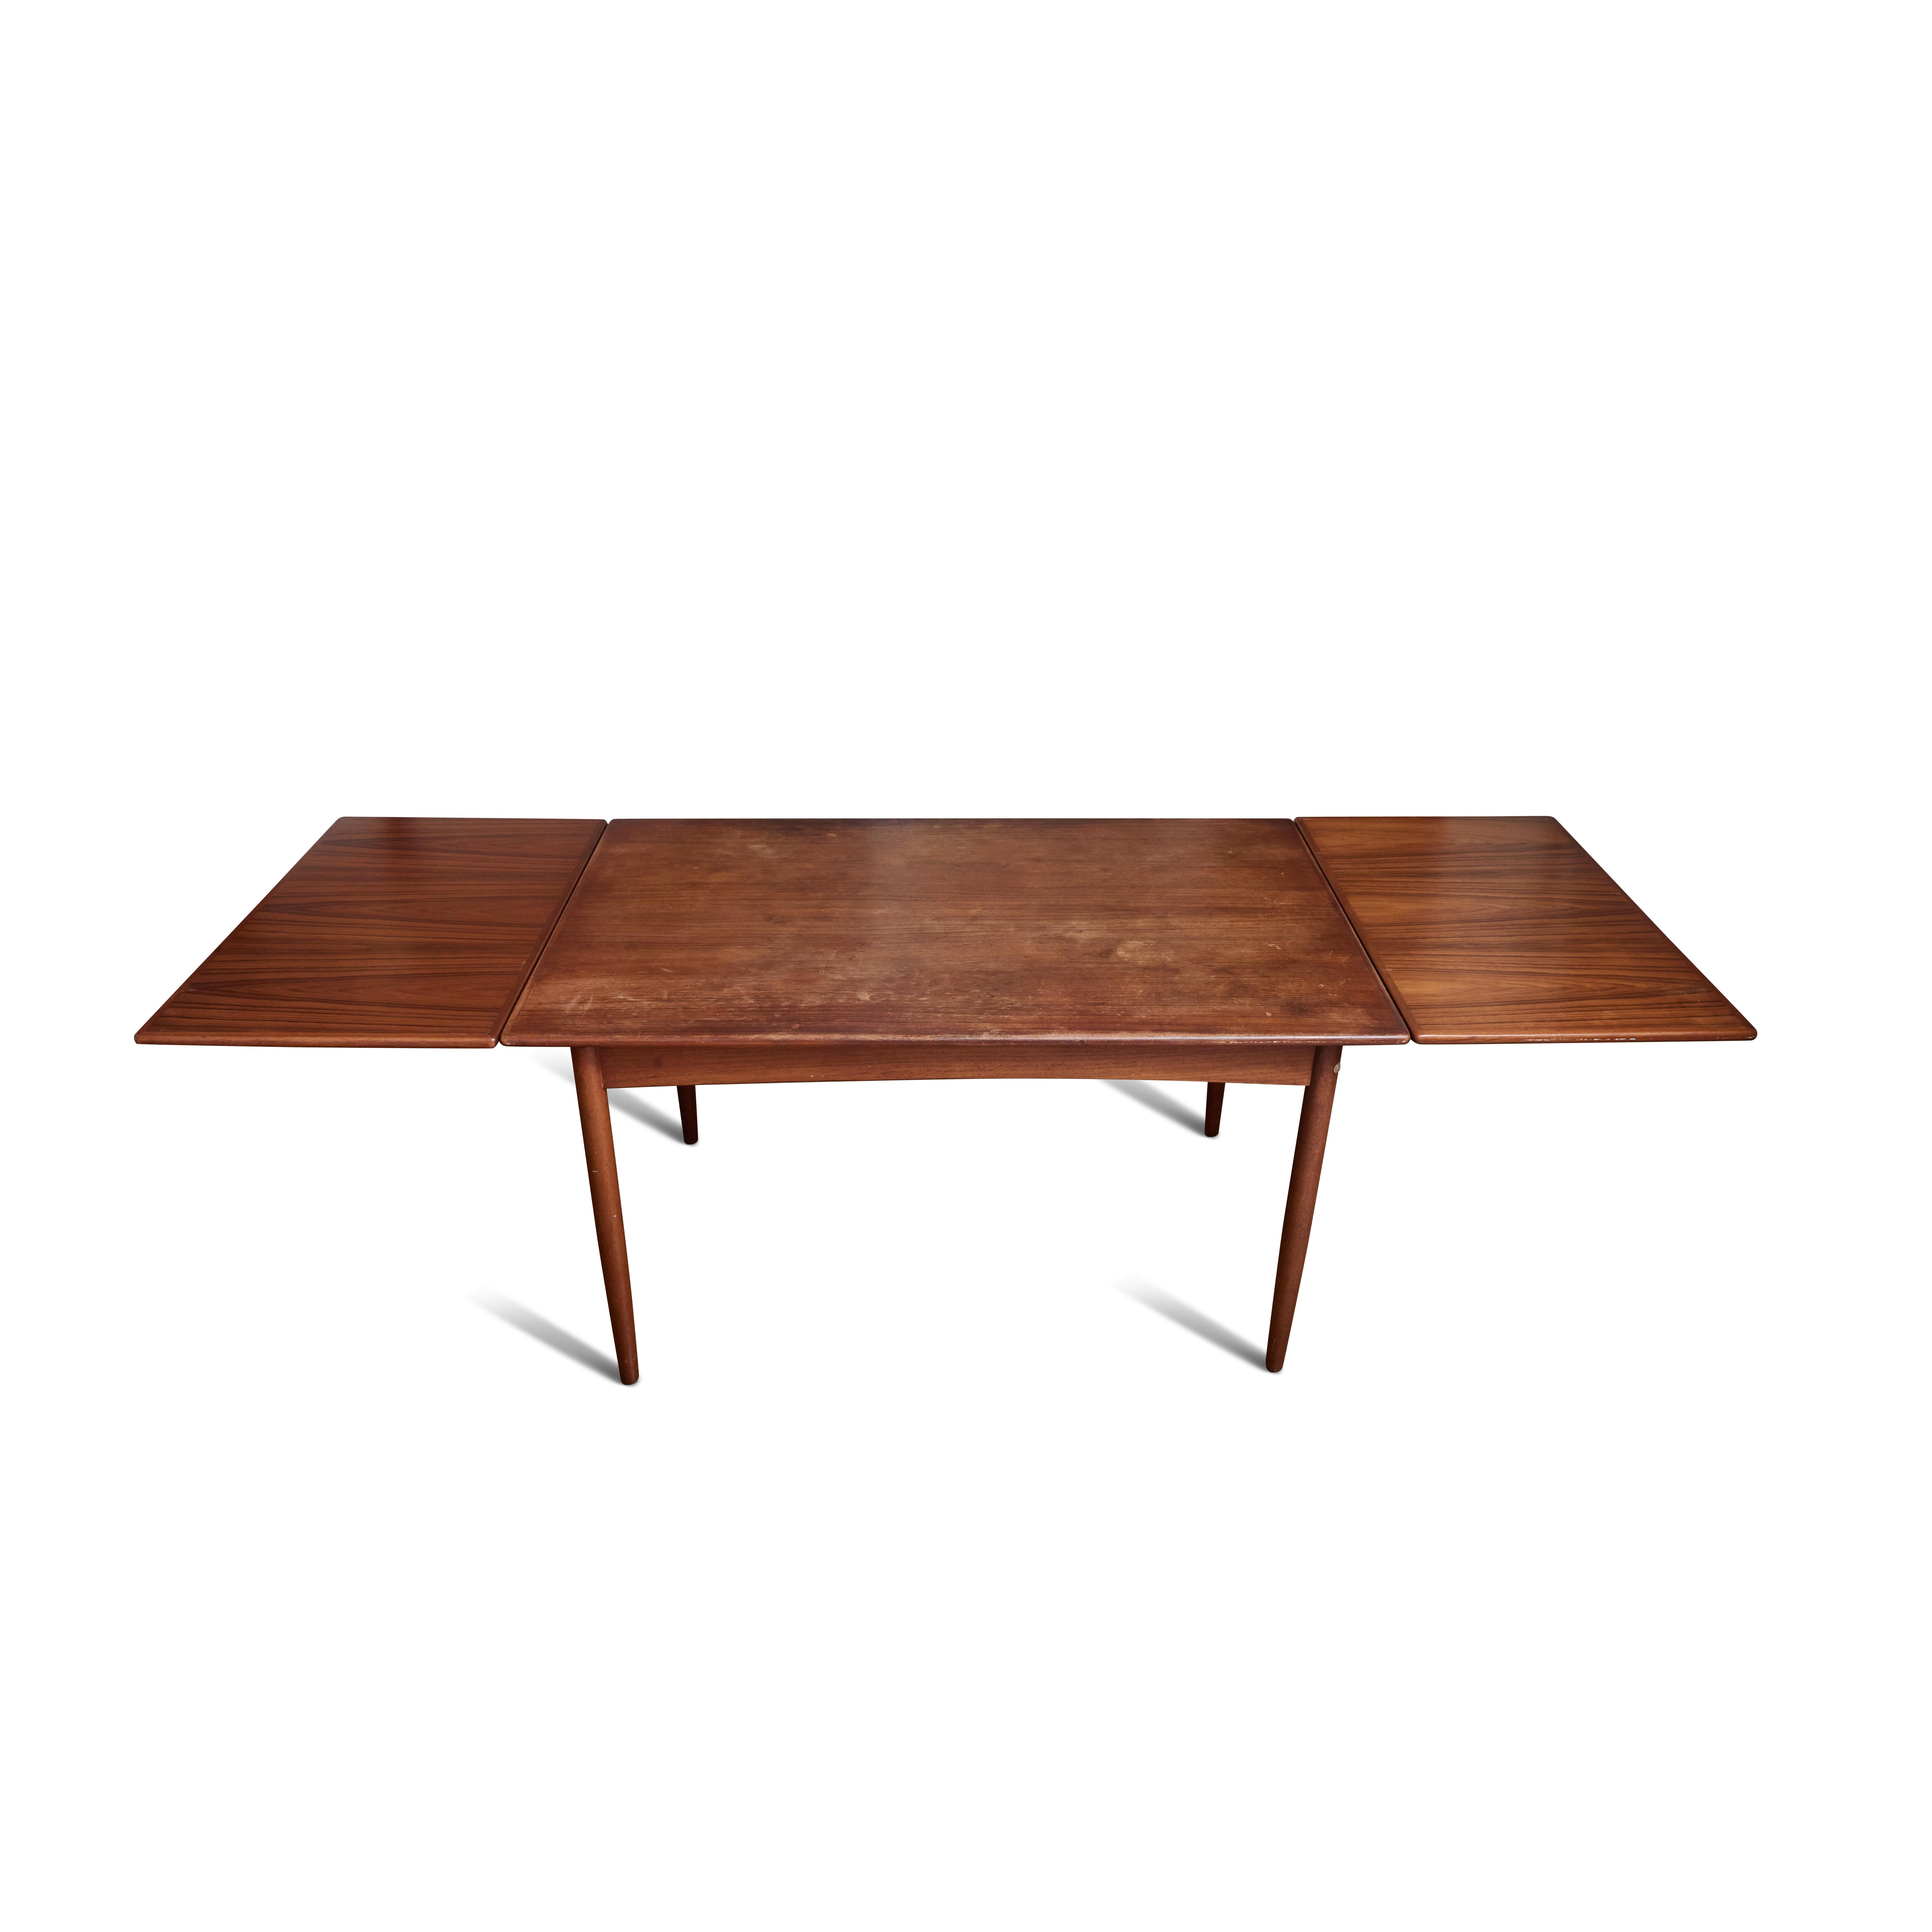 1960s Hans J. Wegner AT-316 Extension Dining Table in Teak. An incredibly refined and cleverly designed extendible table designed by the legendary Wegner for Andreas Tuck. Executed in solid teak wood with 2x leaf slides that extend the table length